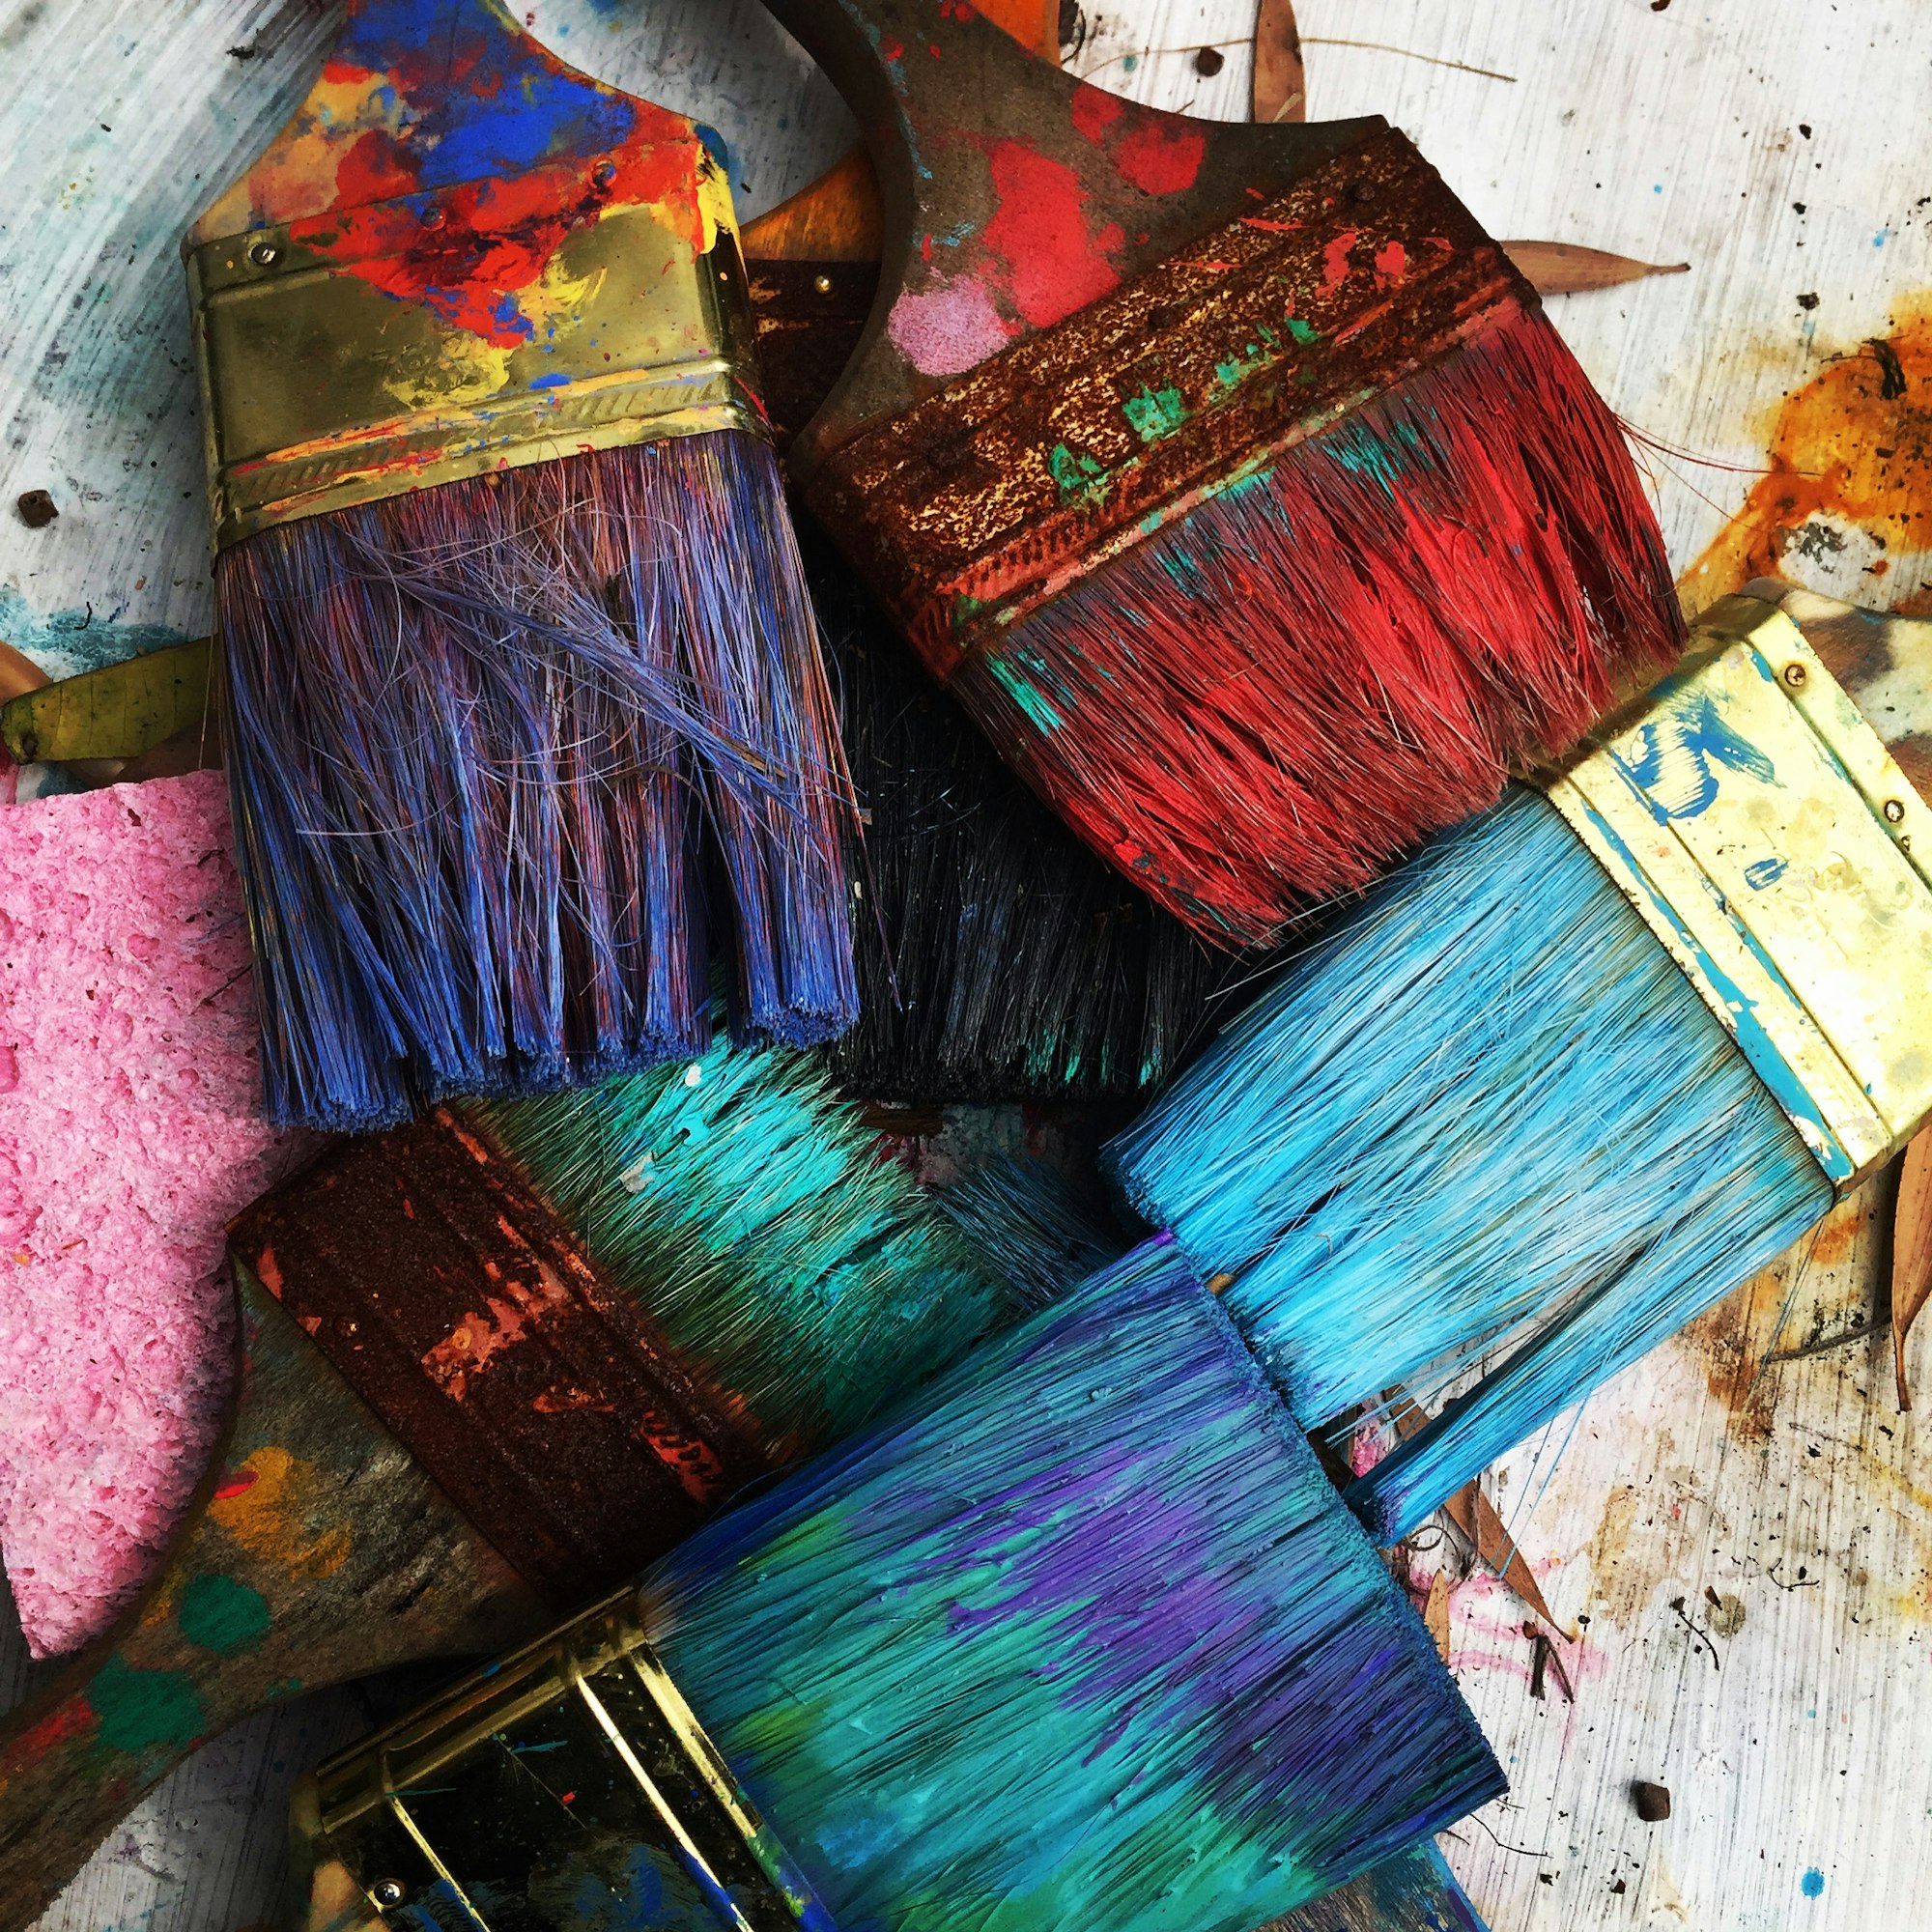 The Importance of Creative Skills in Your Work